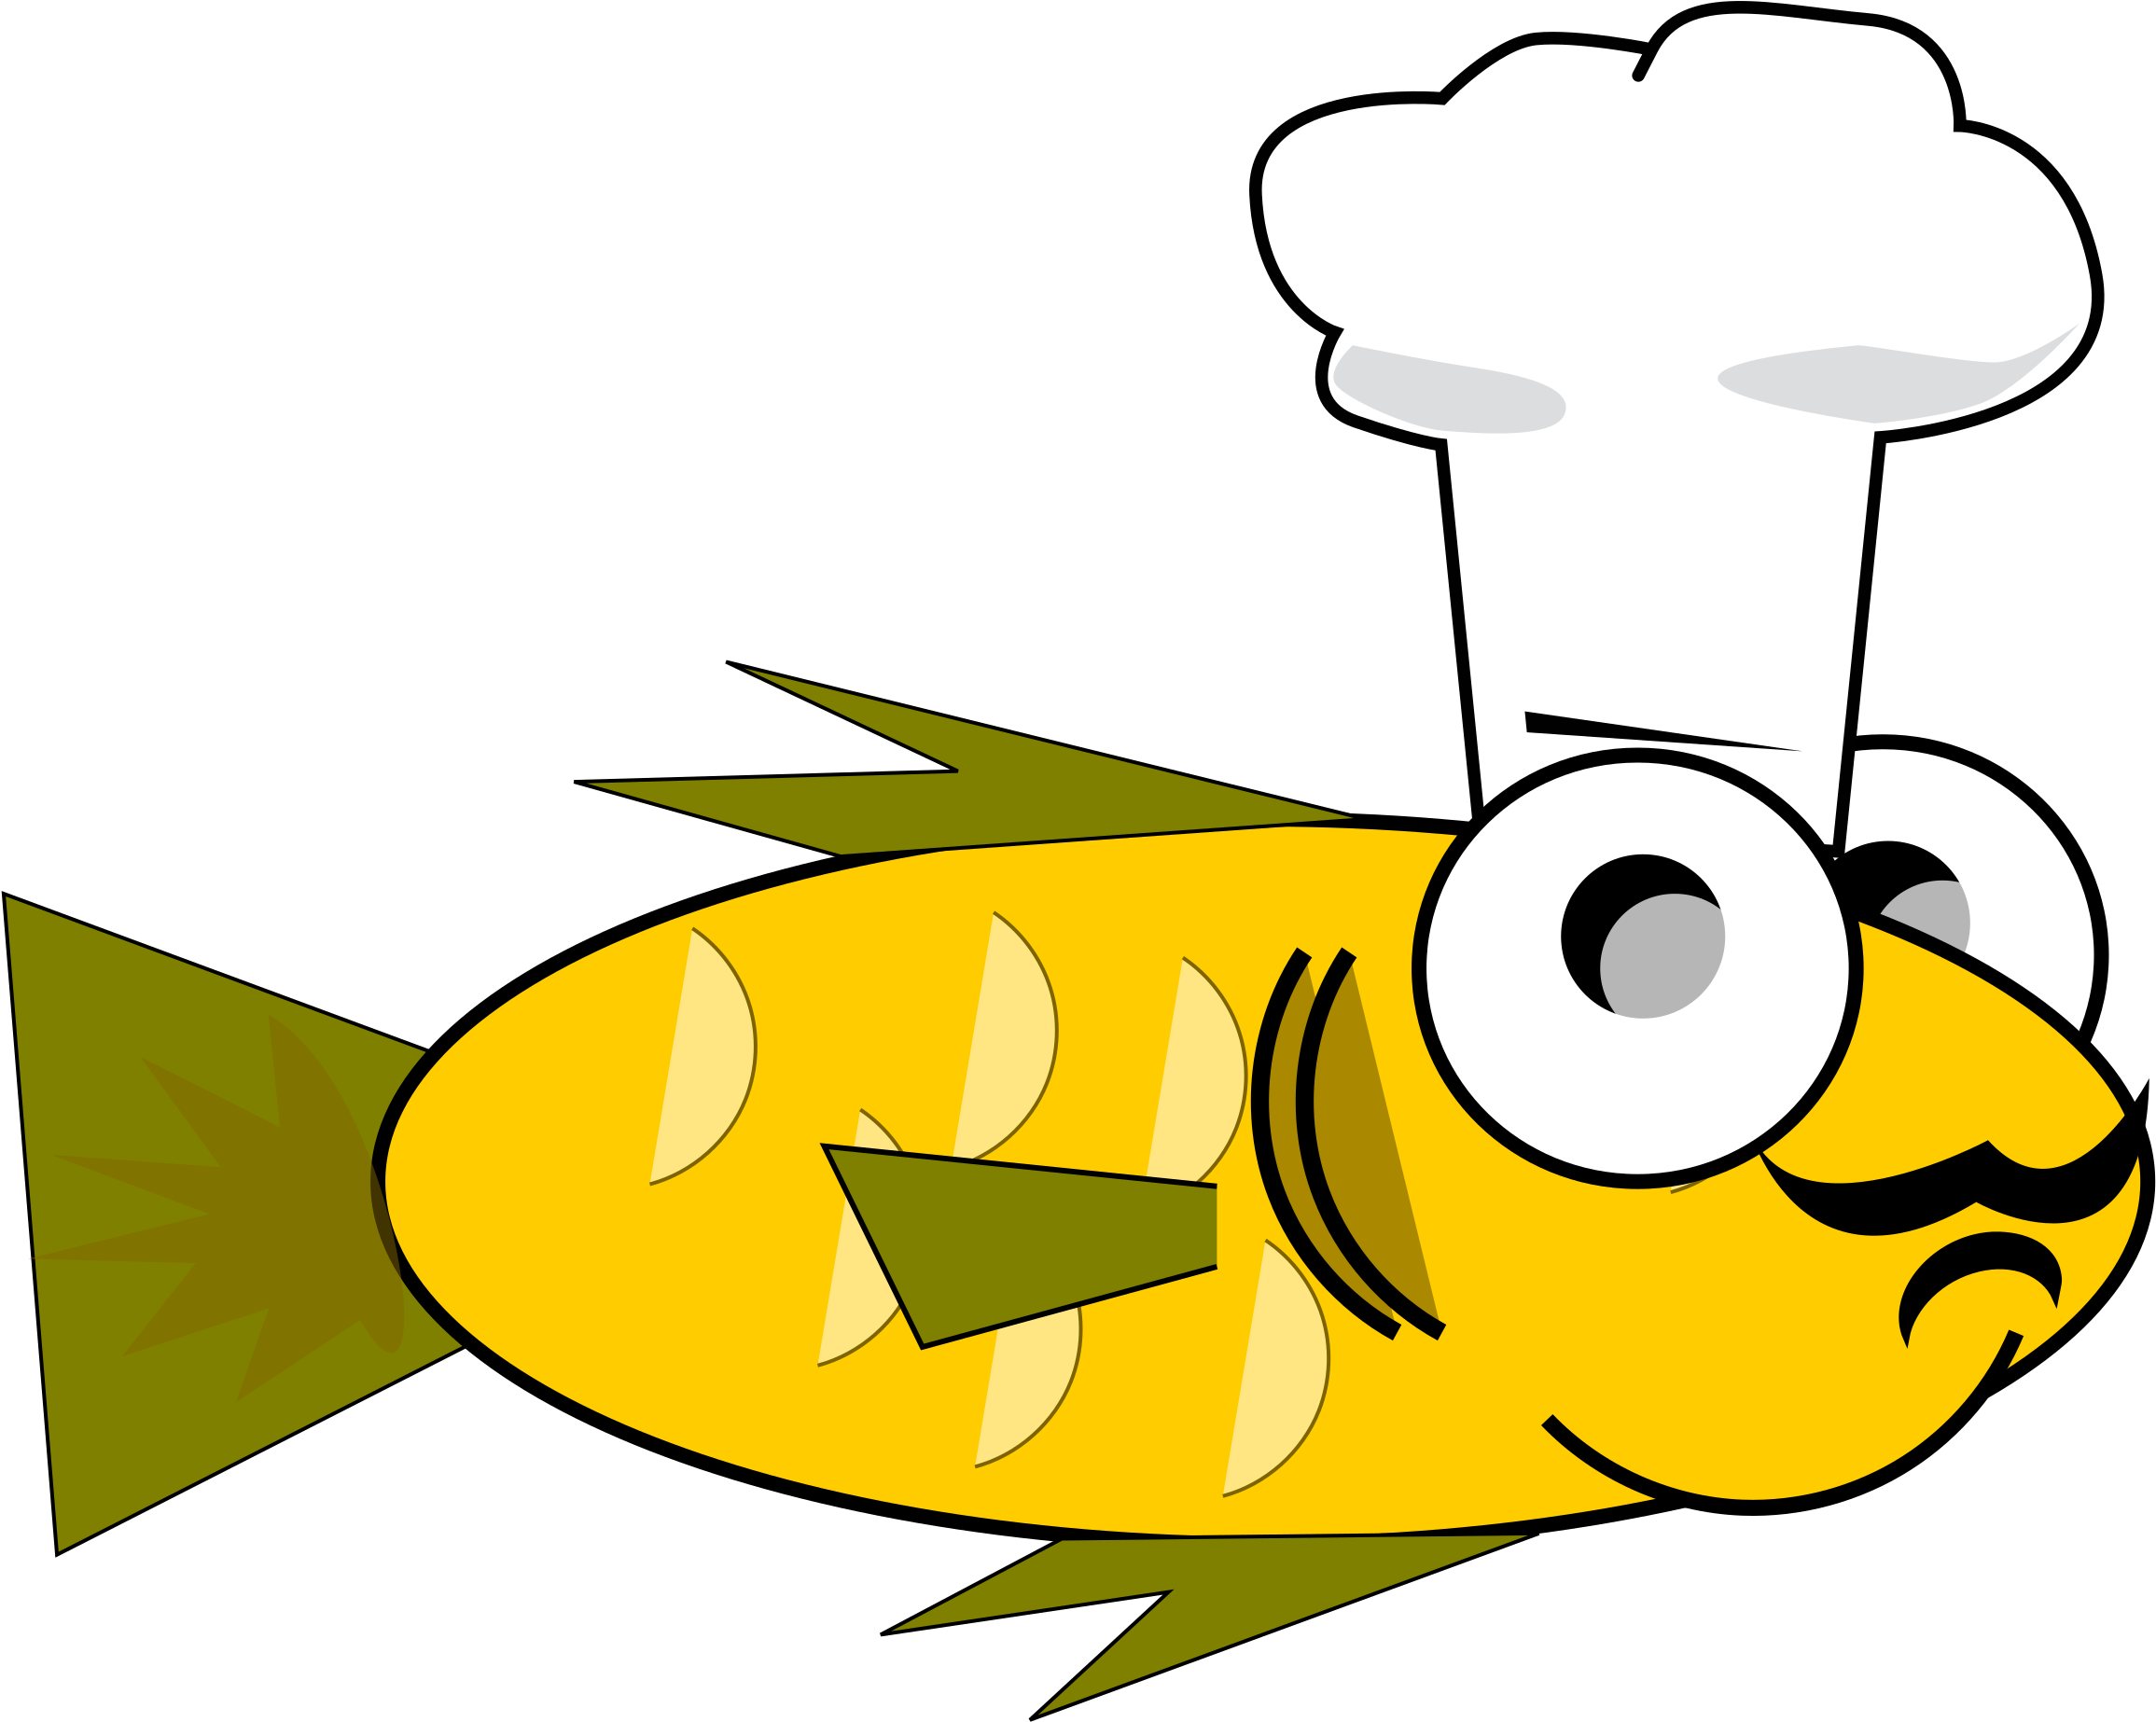 Big Image - Fish Wearing Chef Hat Shower Curtain (2400x2000)